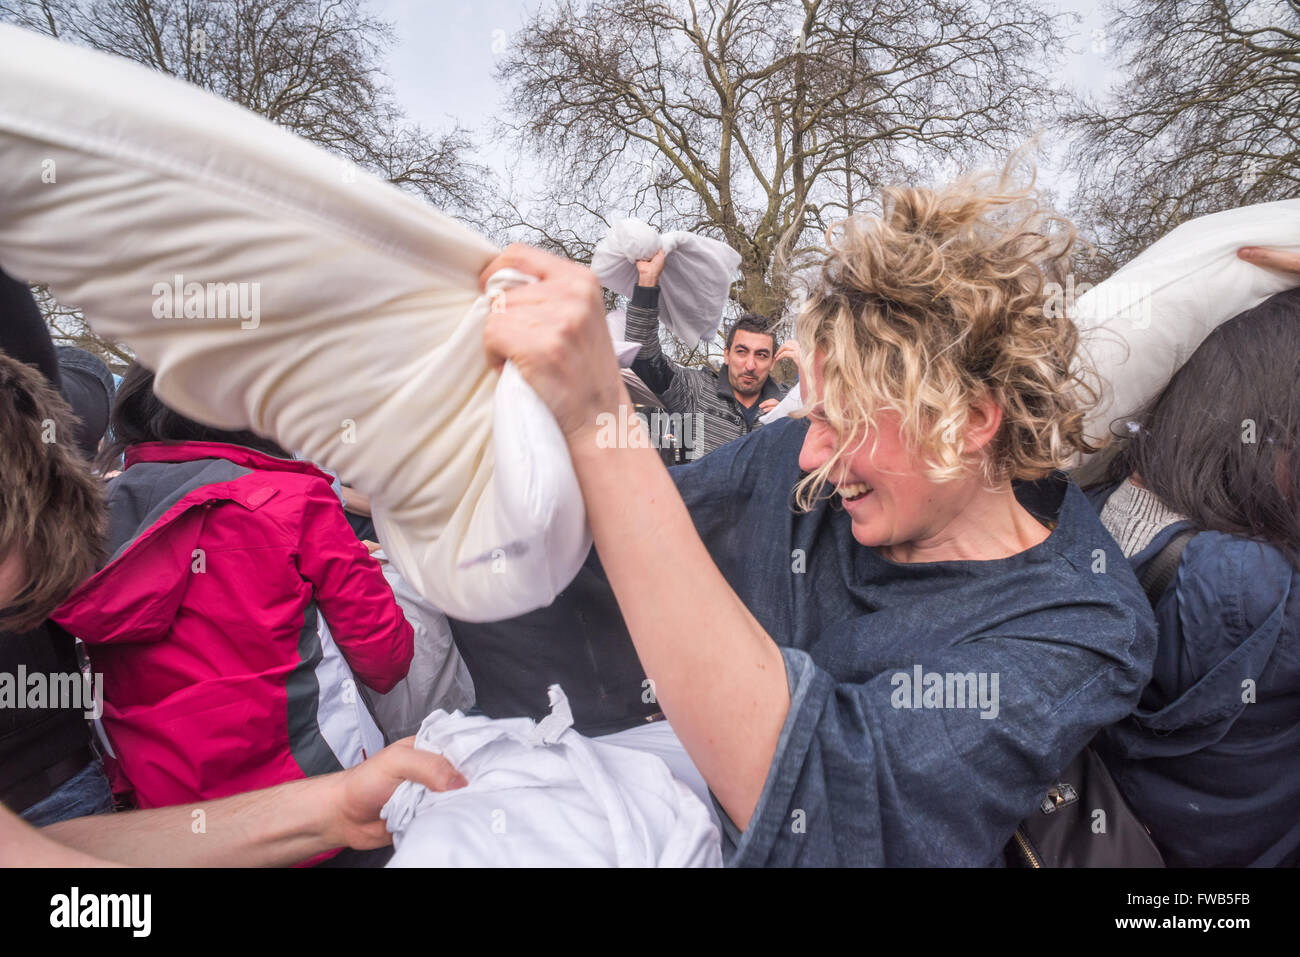 London, UK. 2nd April, 2016. Hundreds come armed with pillows to take part in a giant pillow fight despite official attempts to stop this annual event, moved at 24 hours notice to Kennington Park. A few left when police told them the event was cancelled, but most stayed to enjoy the fight.  This was the 9th year of similar massive pillow fights in over 50 other cities around the world inspired by the urban playground movement, claiming cities are public spaces for people. Peter Marshall/Alamy Live News Stock Photo